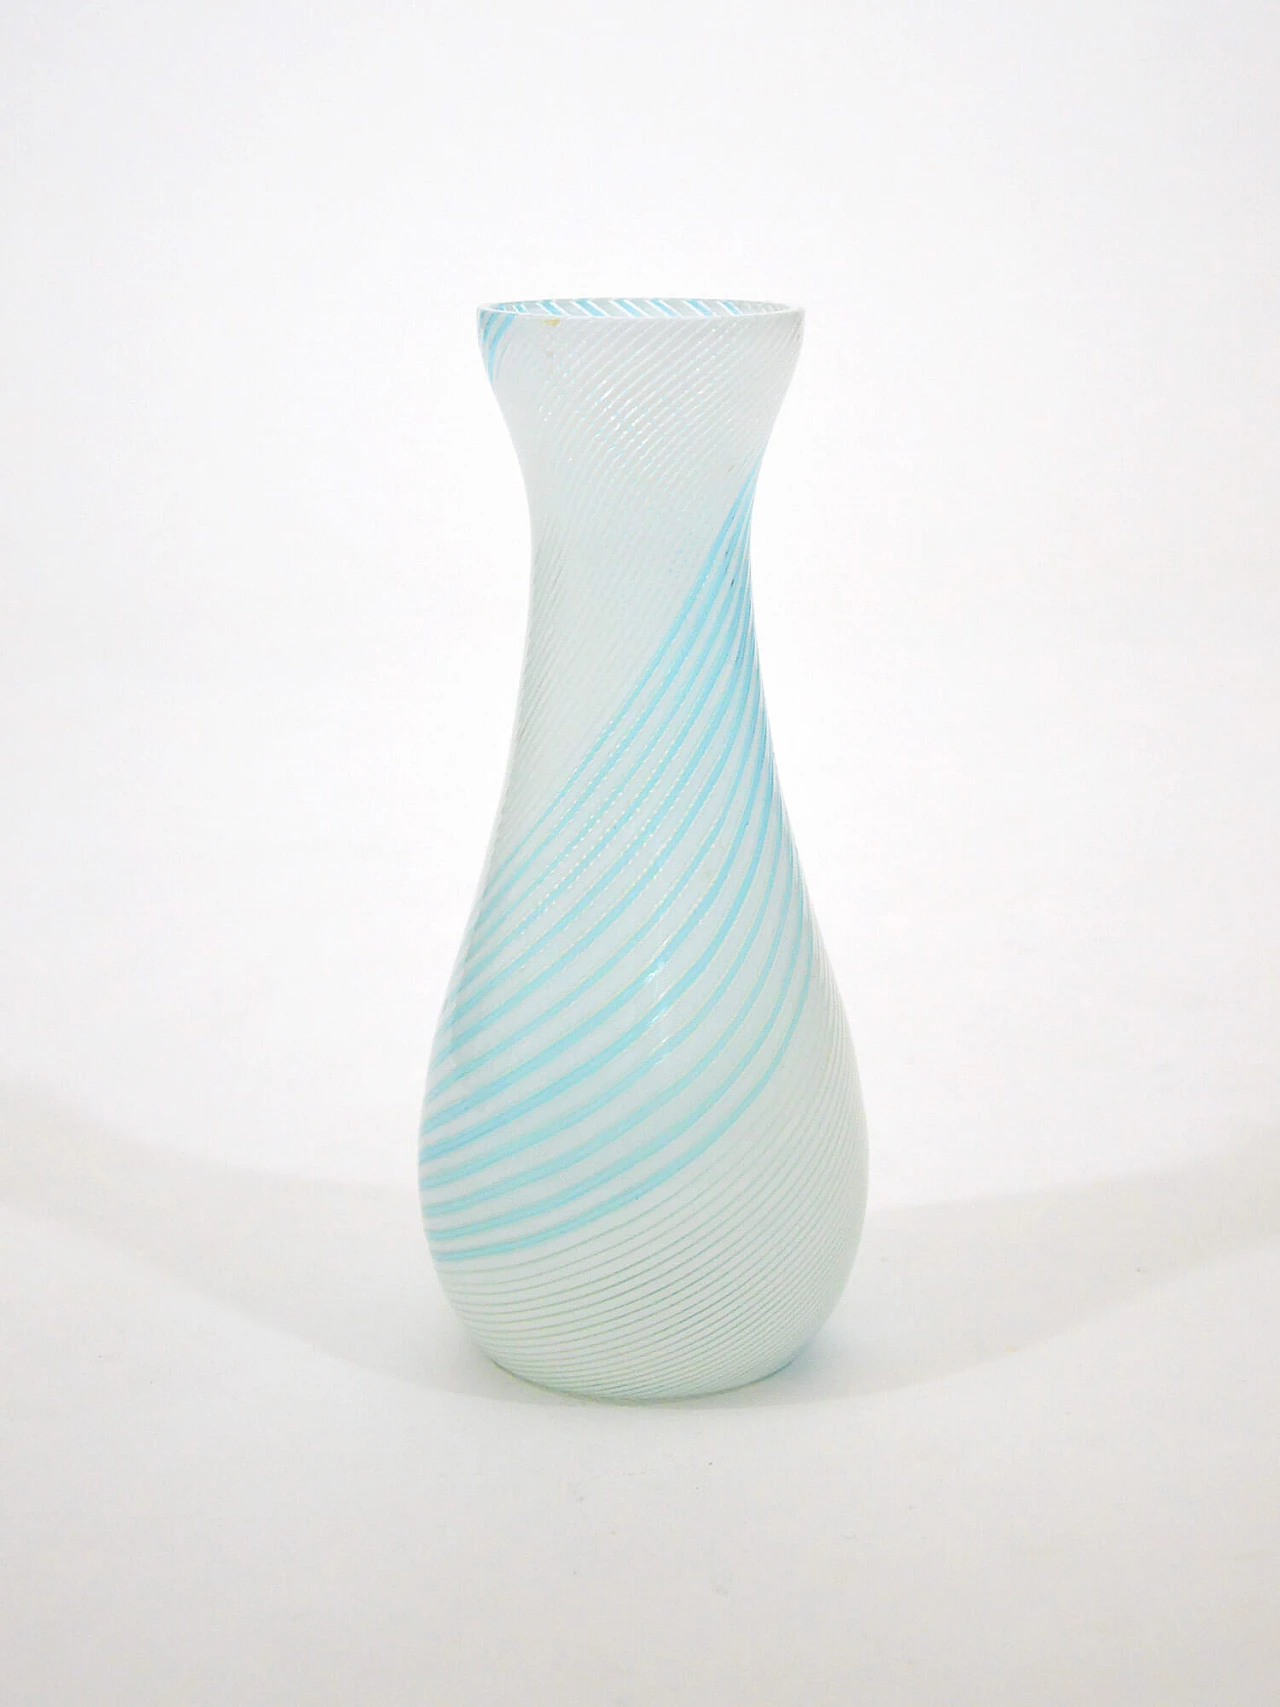 Murano glass vase by Dino Martens for Aureliano Toso, 1950s 1